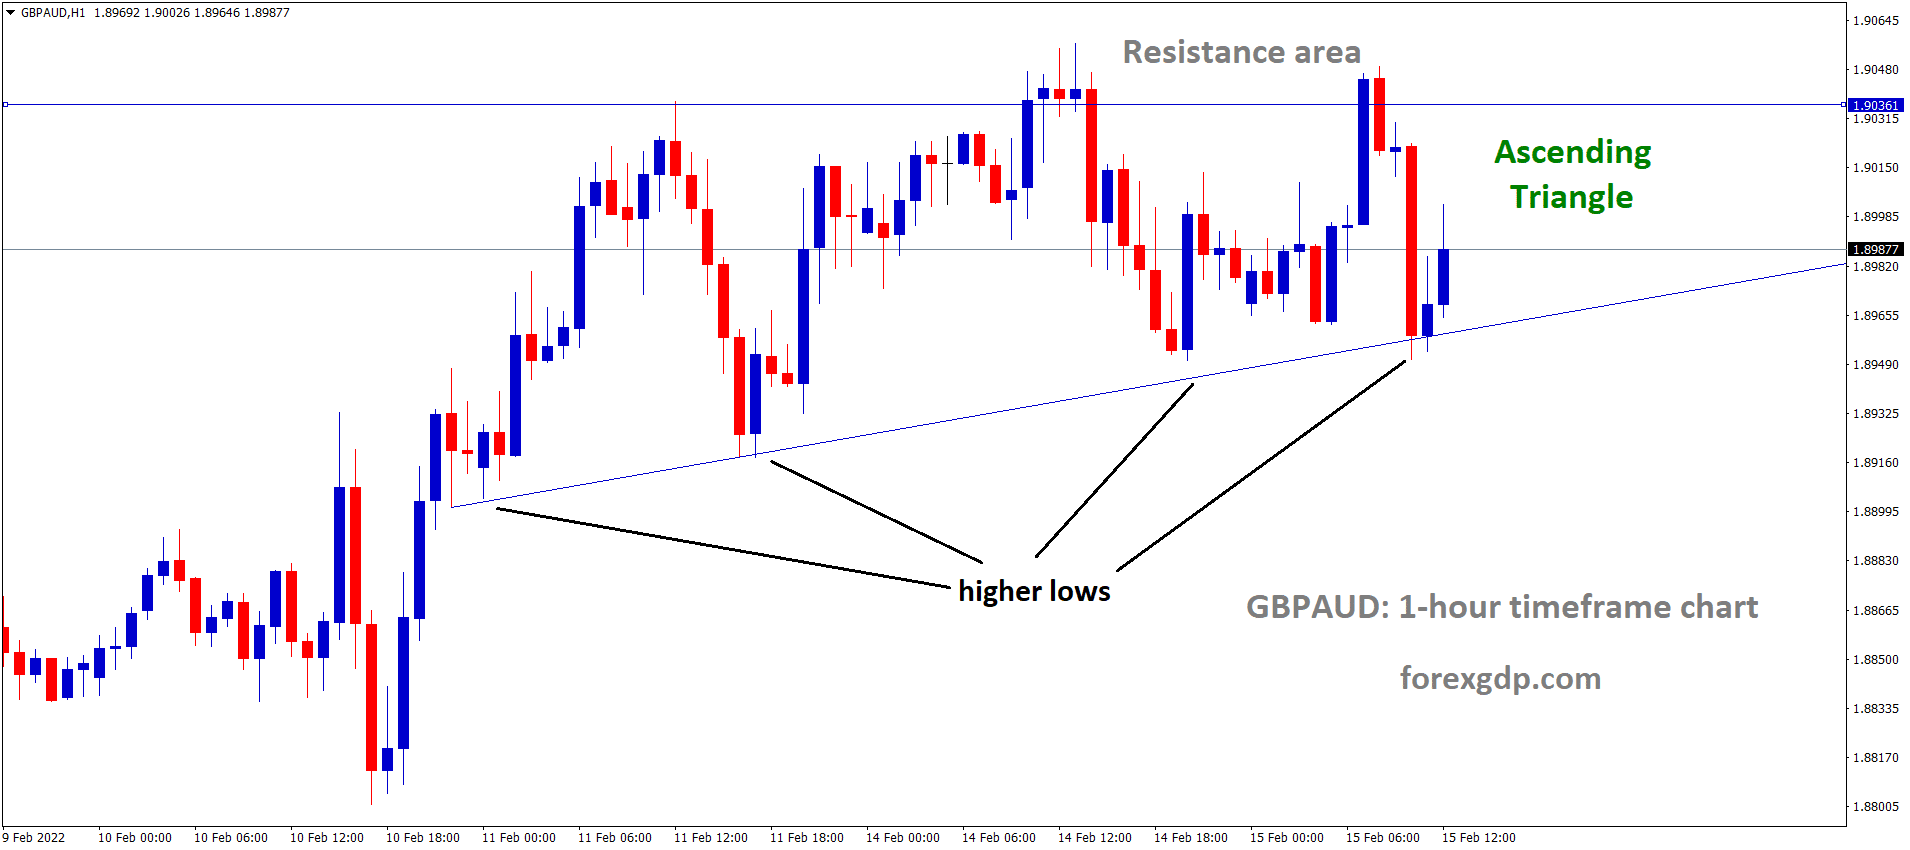 GBPAUD is moving in an ascending triangle pattern and the market has rebounded from the higher low area of the pattern